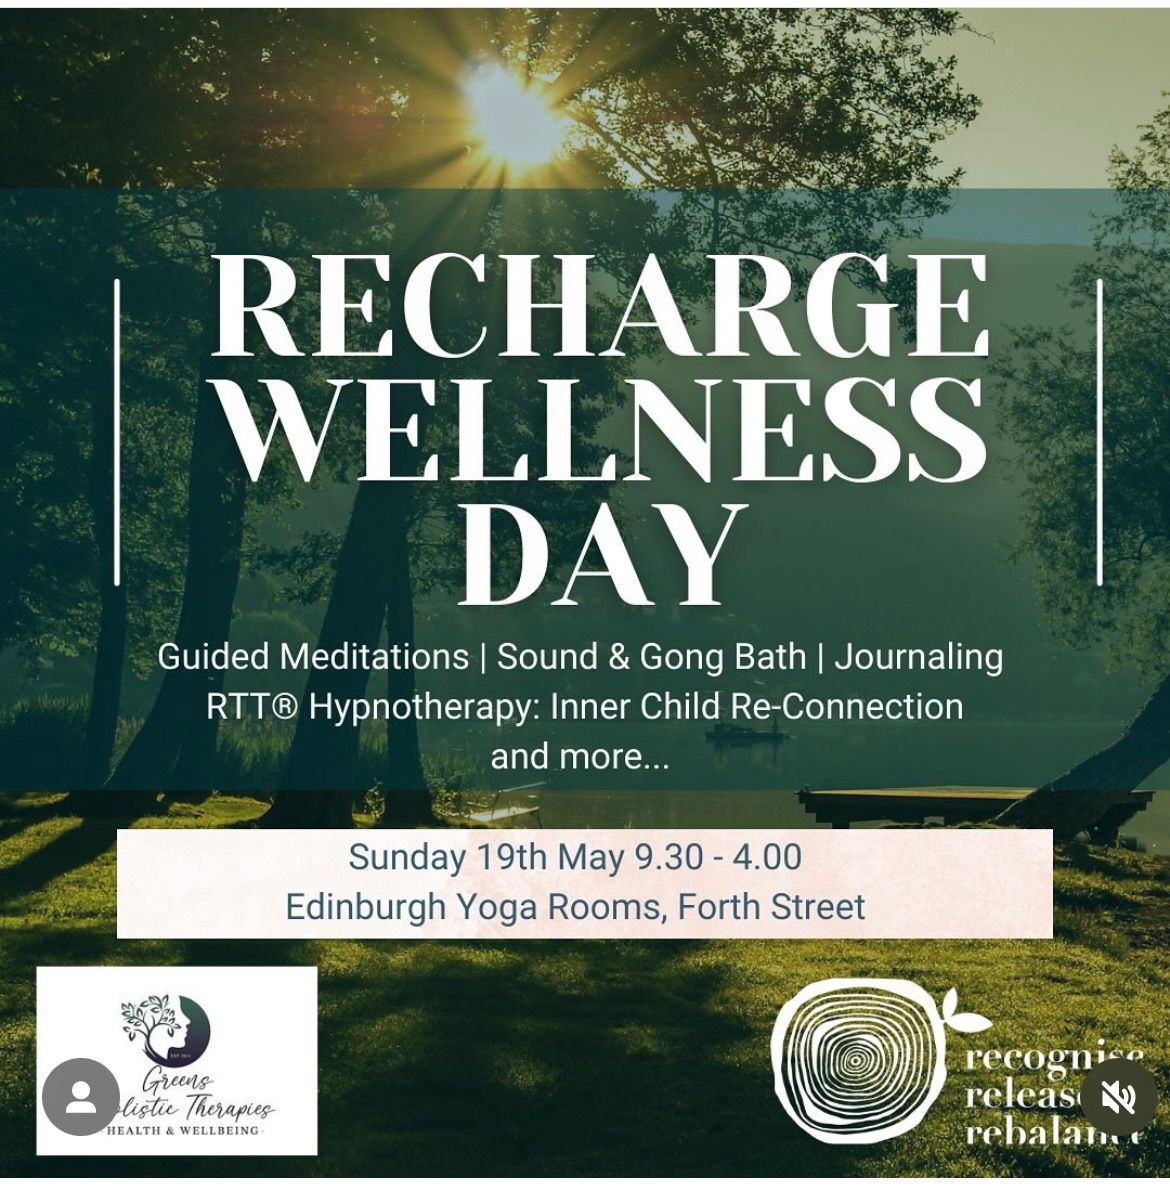 Recharge Wellness Day